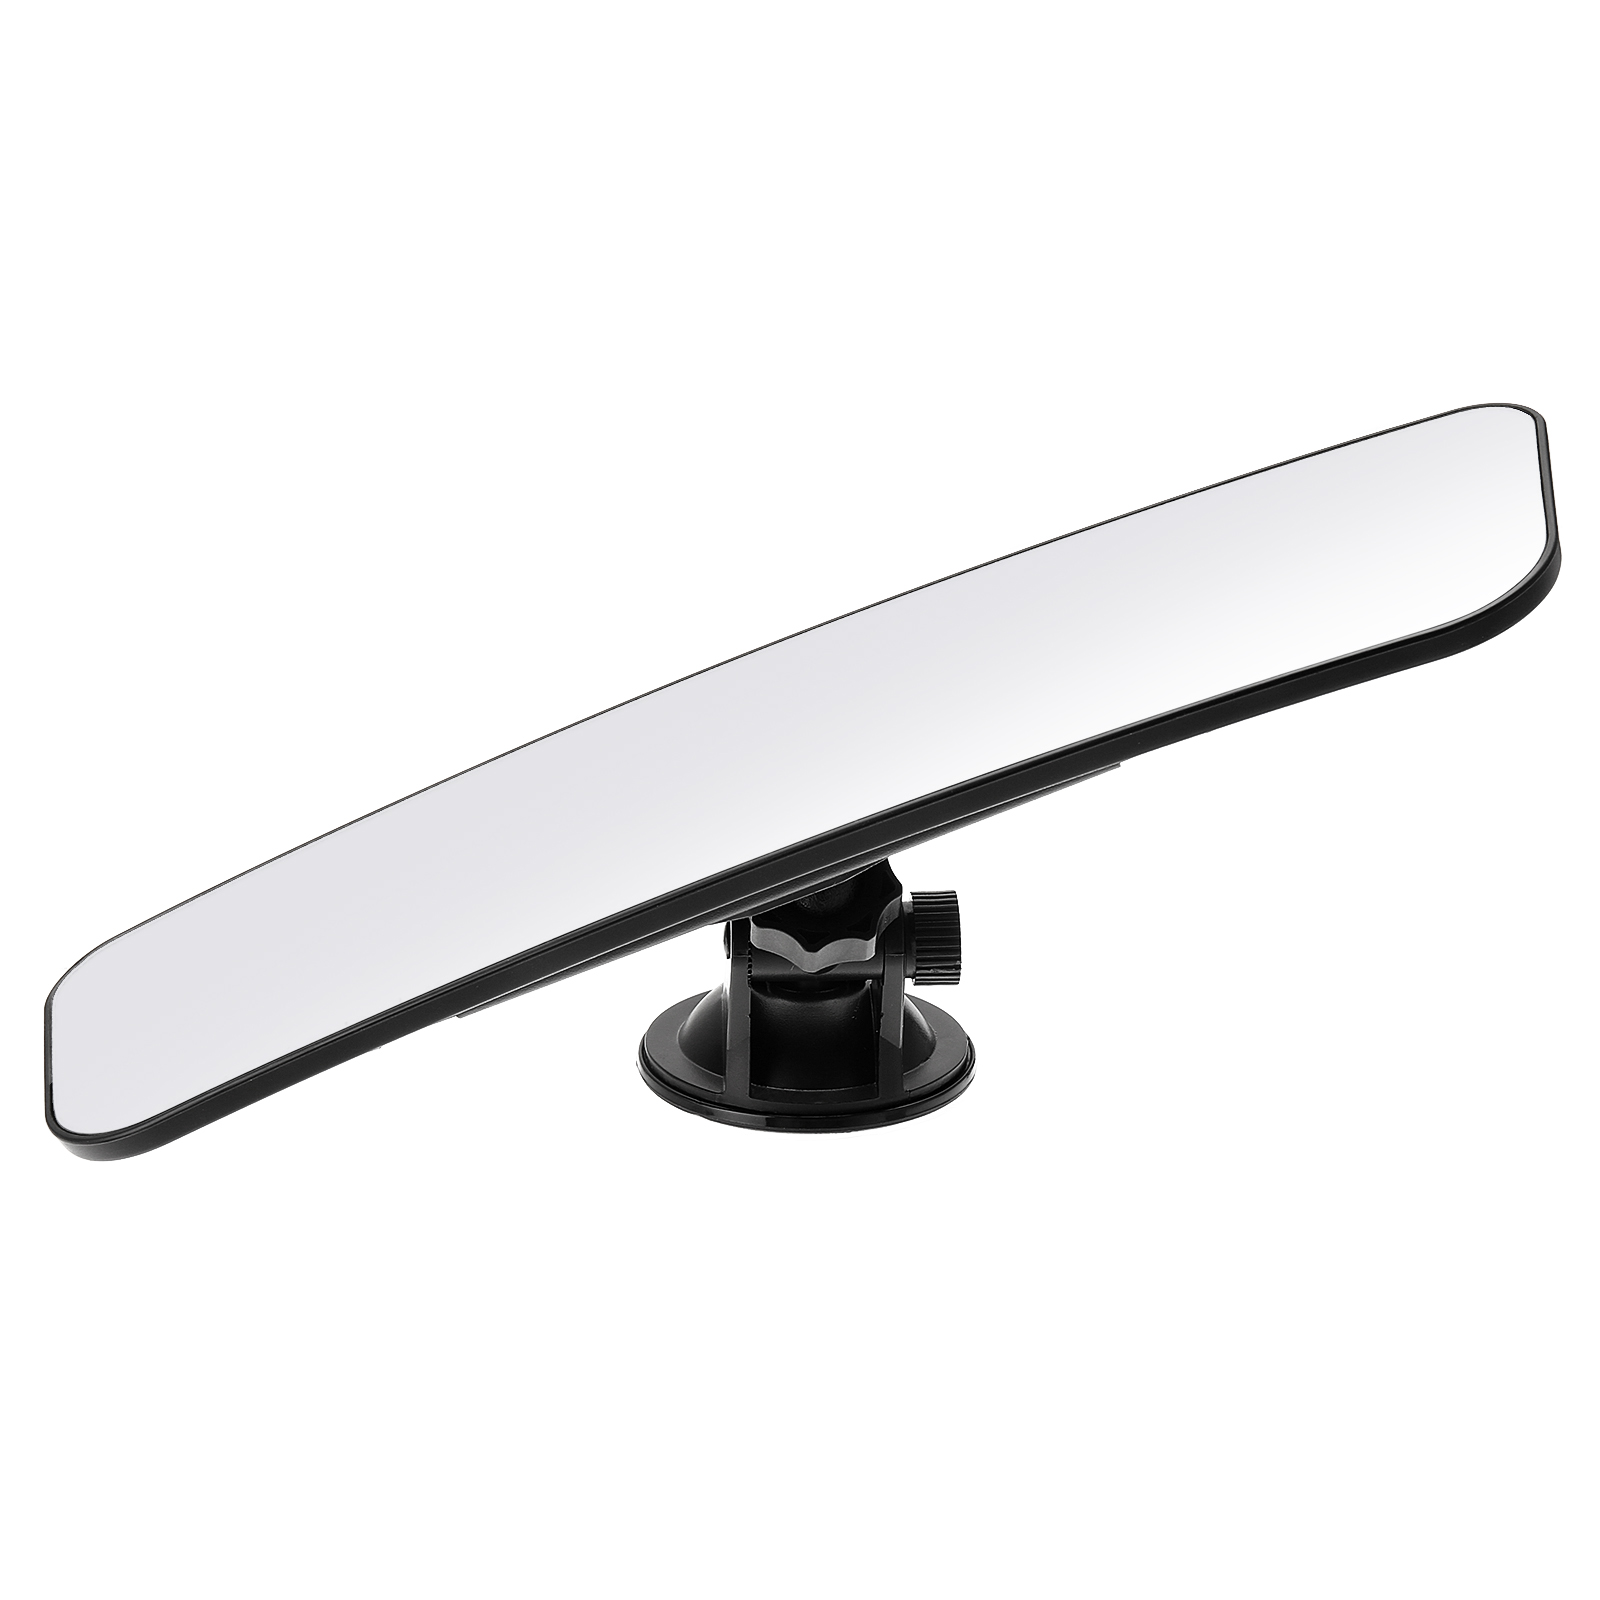 ELUTO anti Glare Suction Cup Rear View Mirror Universal Interior Rearview Mirror Wide Angle Rearvier View Mirror